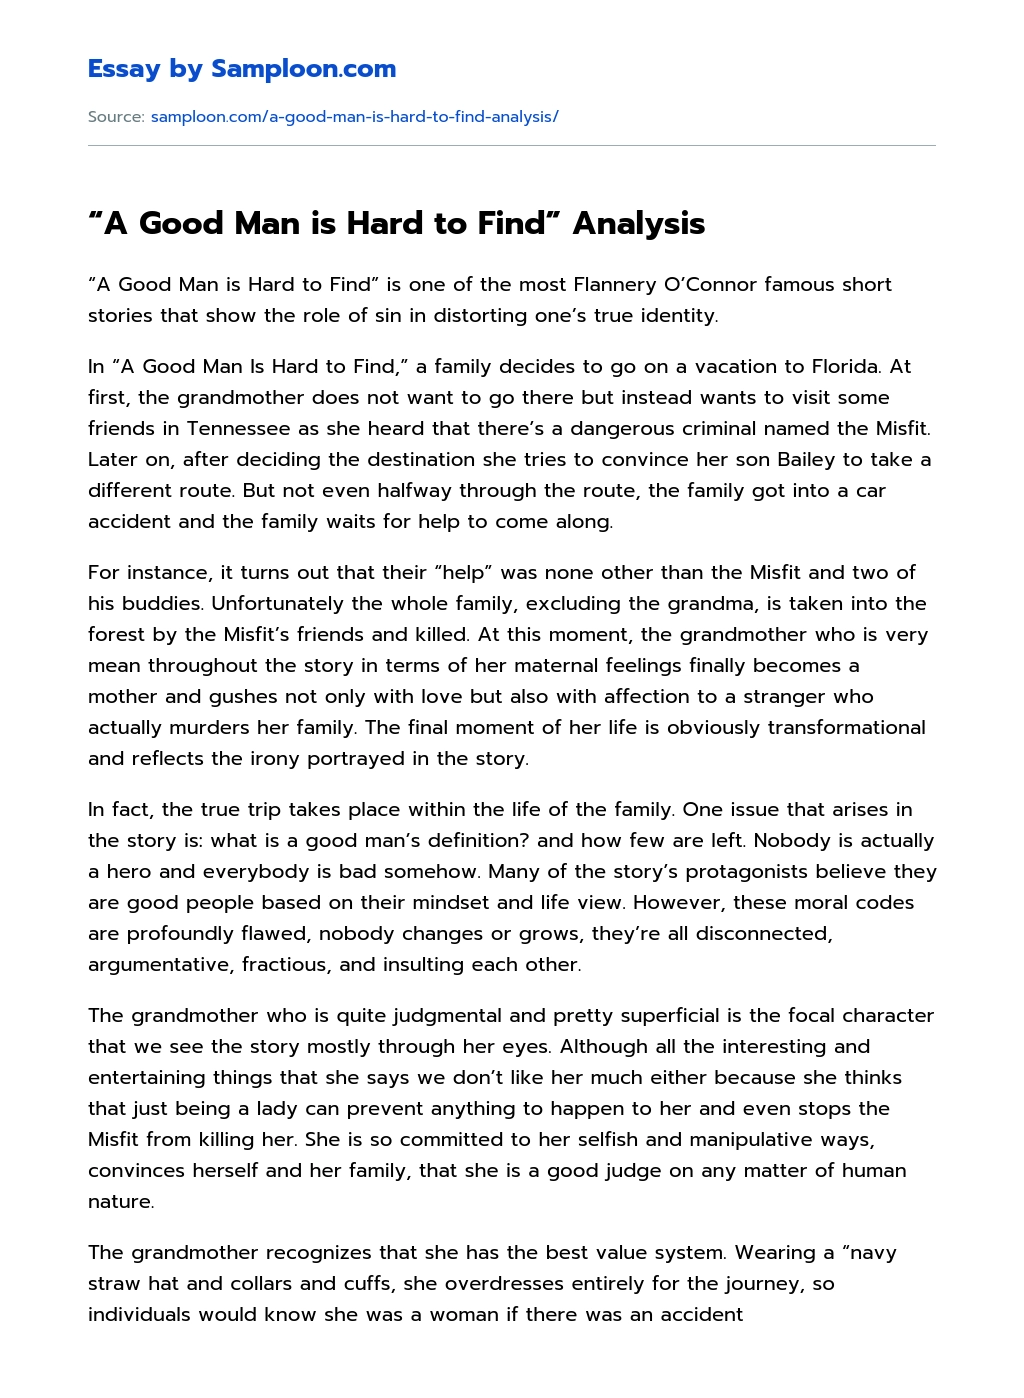 “A Good Man is Hard to Find” Analysis essay